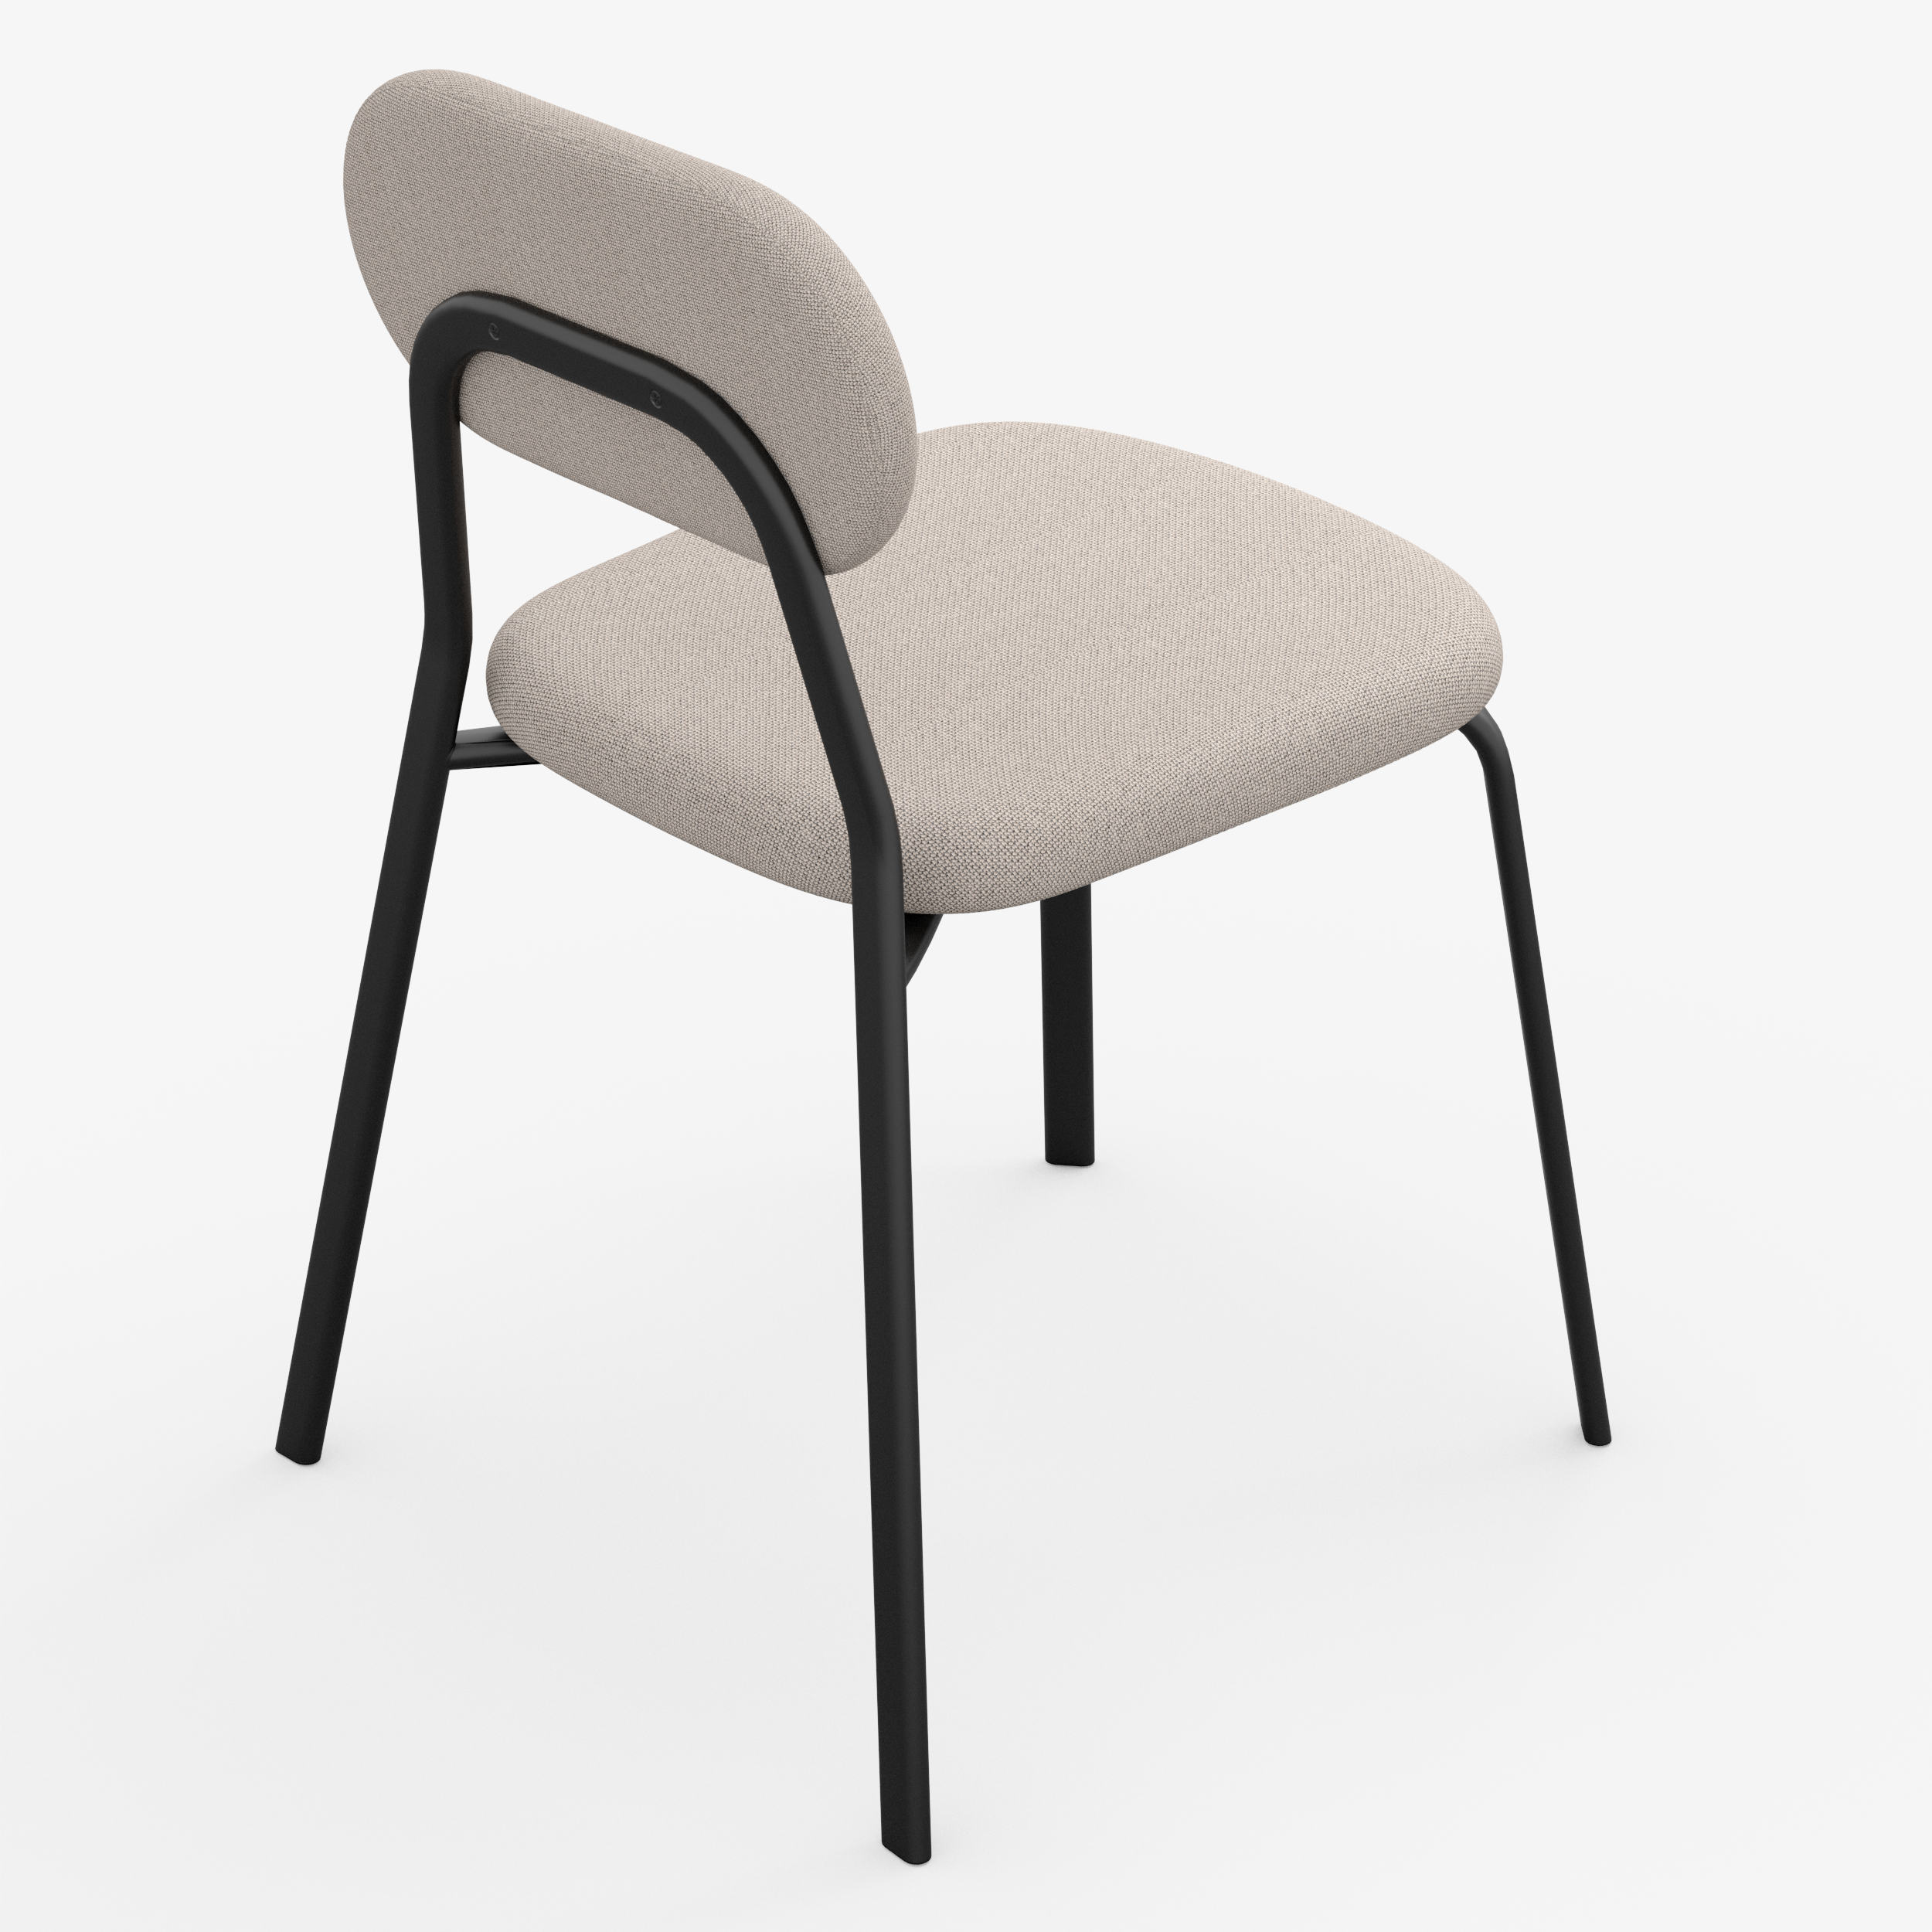 Form - Chair (Oval, Beige)